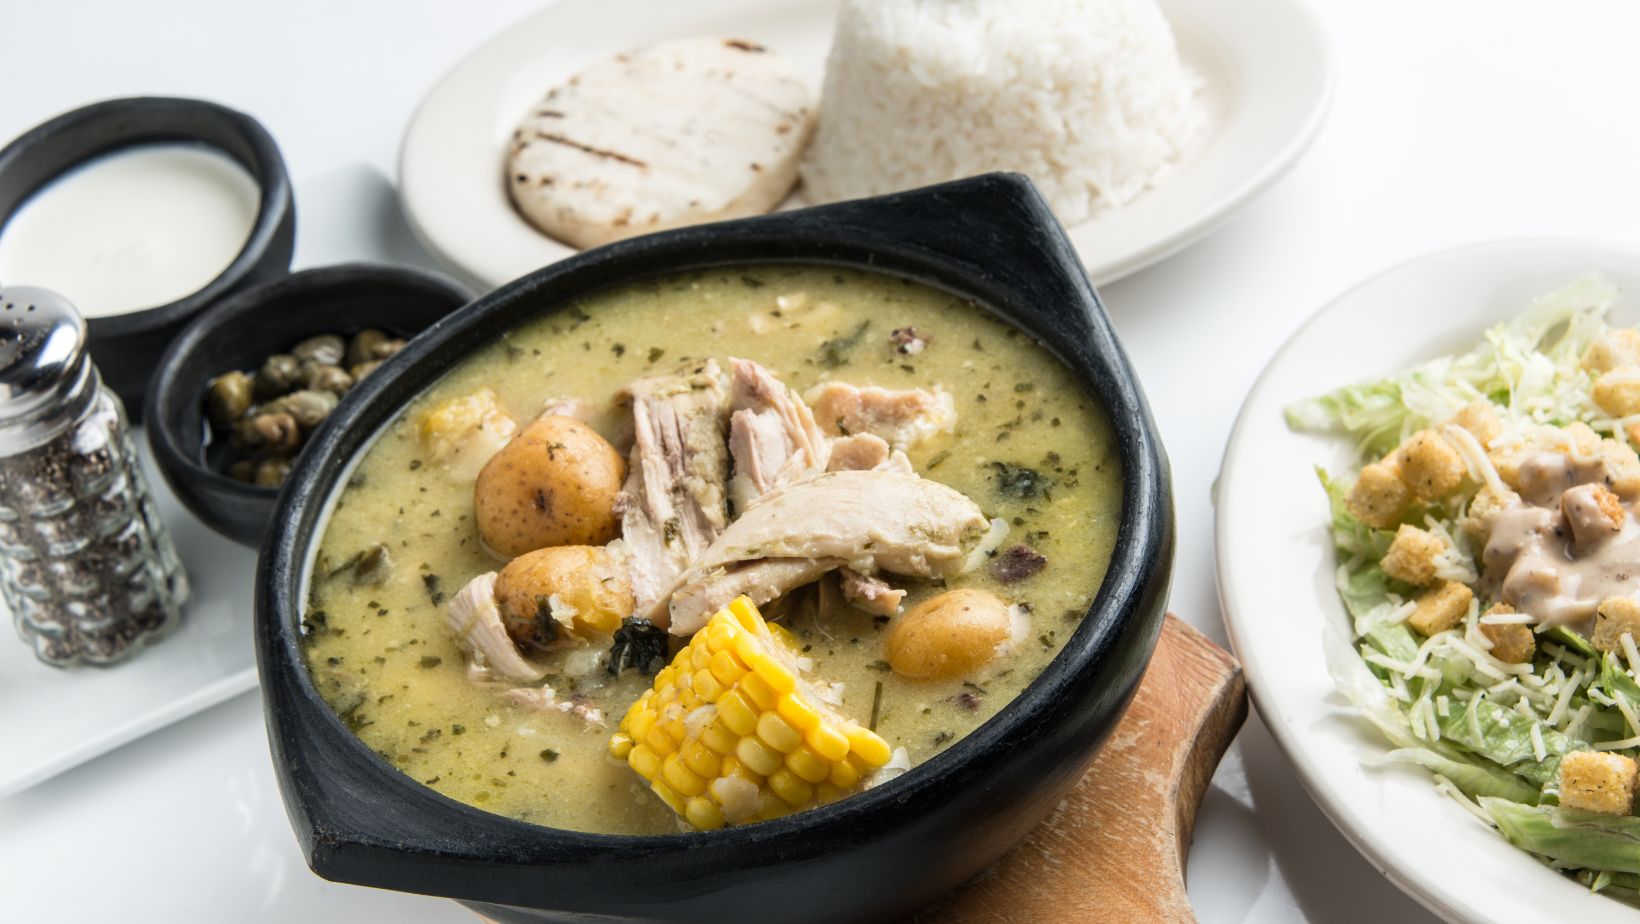 Cell-Cultivated Meat Just Received the Green Light. Would You Drink ‘Caldo’ Made of Lab-Grown Chicken?